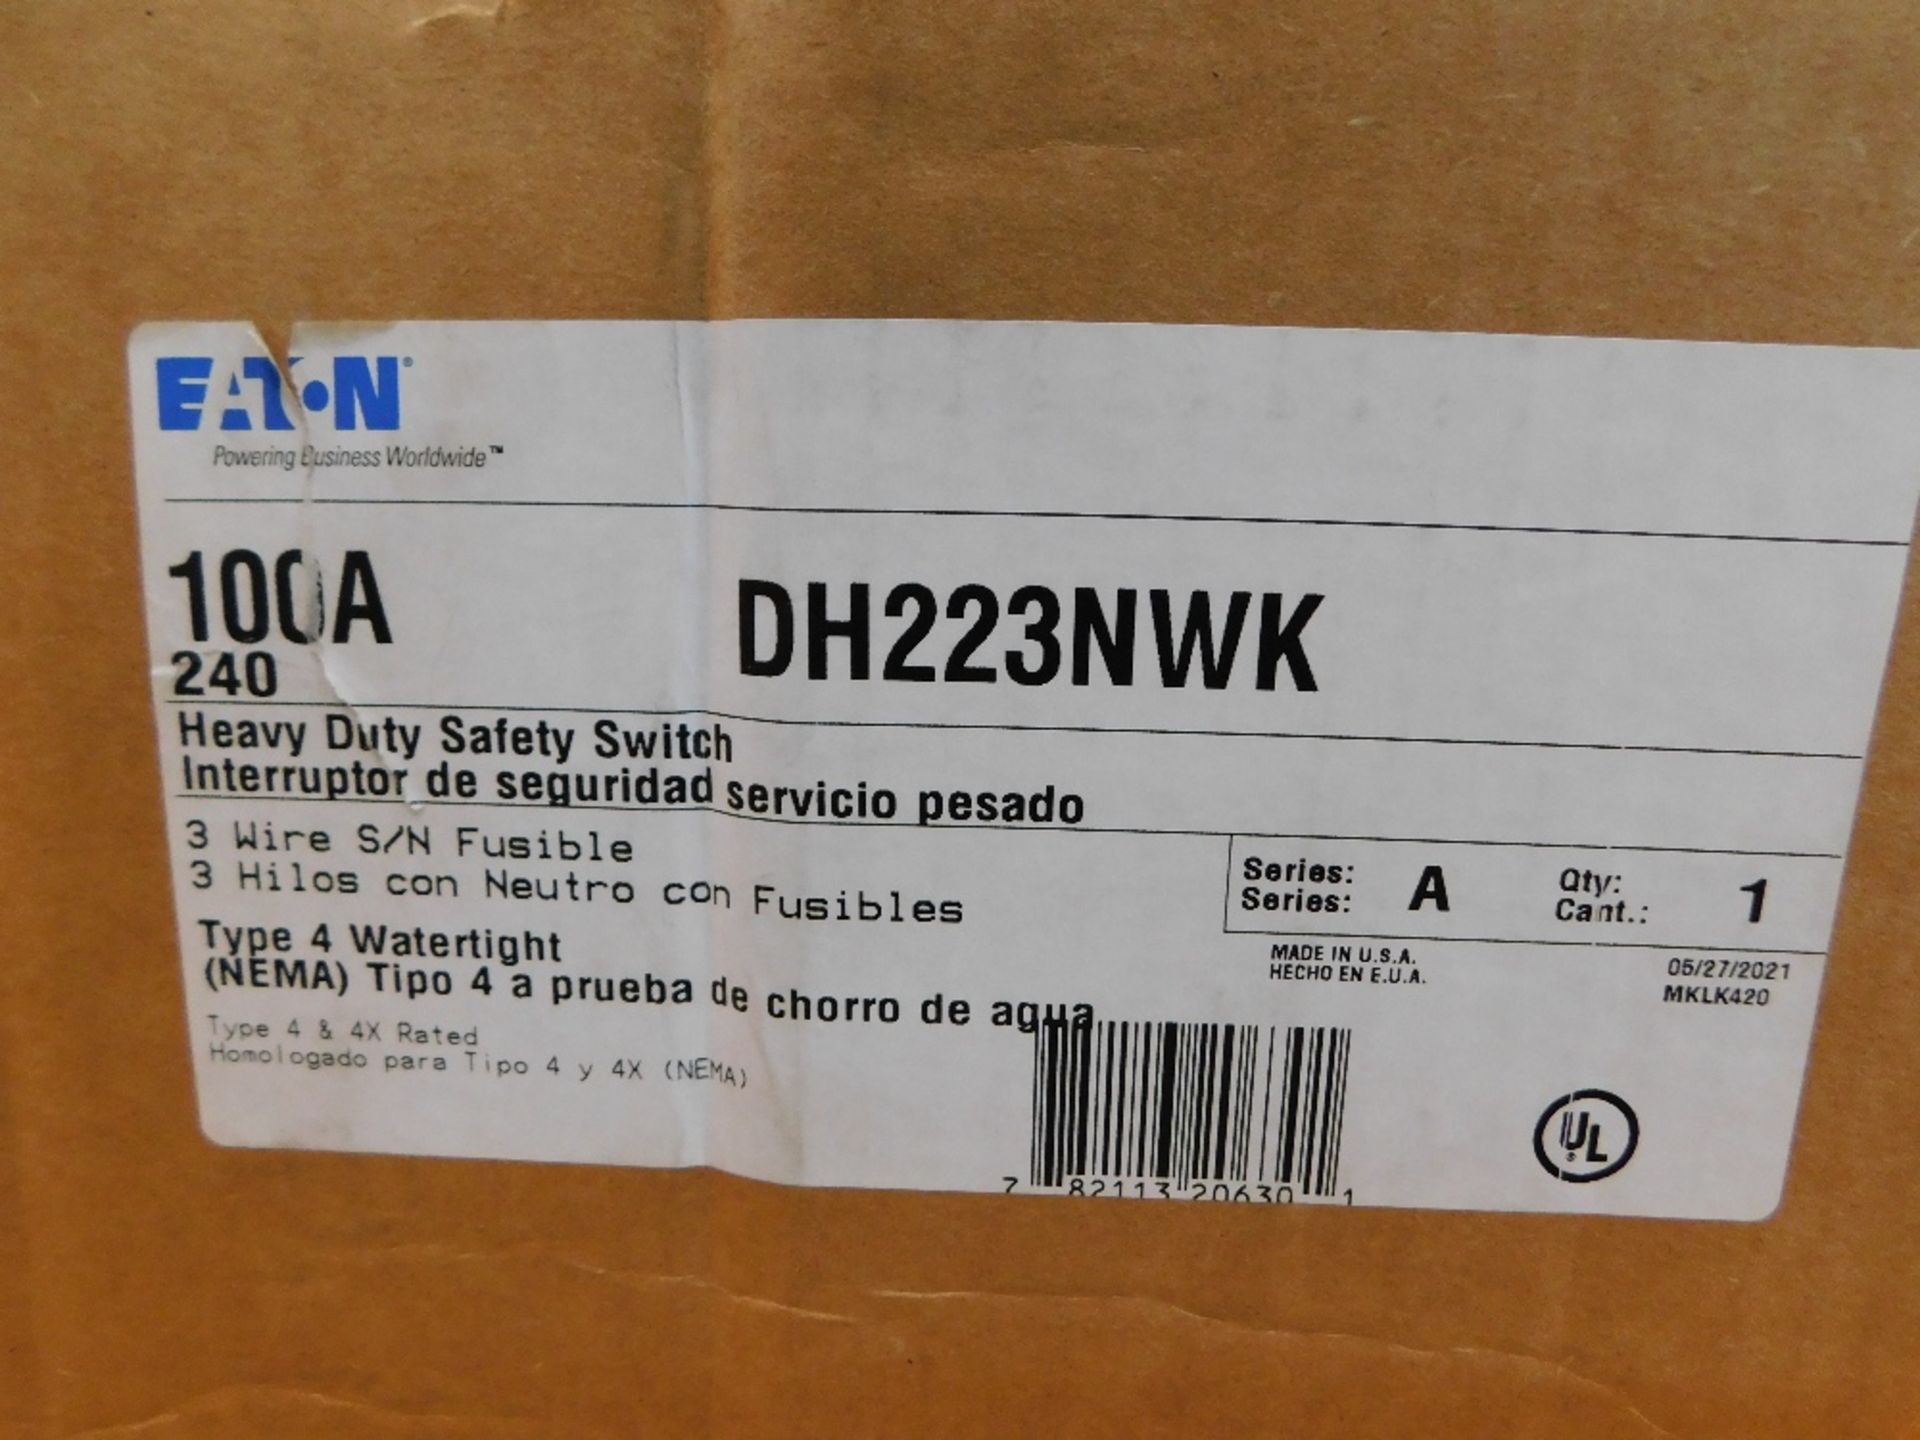 1x Eaton DH223NWK Safety Switches DH 2P 100A 240V 50 60Hz 1Ph Fusible w Neutral 3Wire NEMA 4X